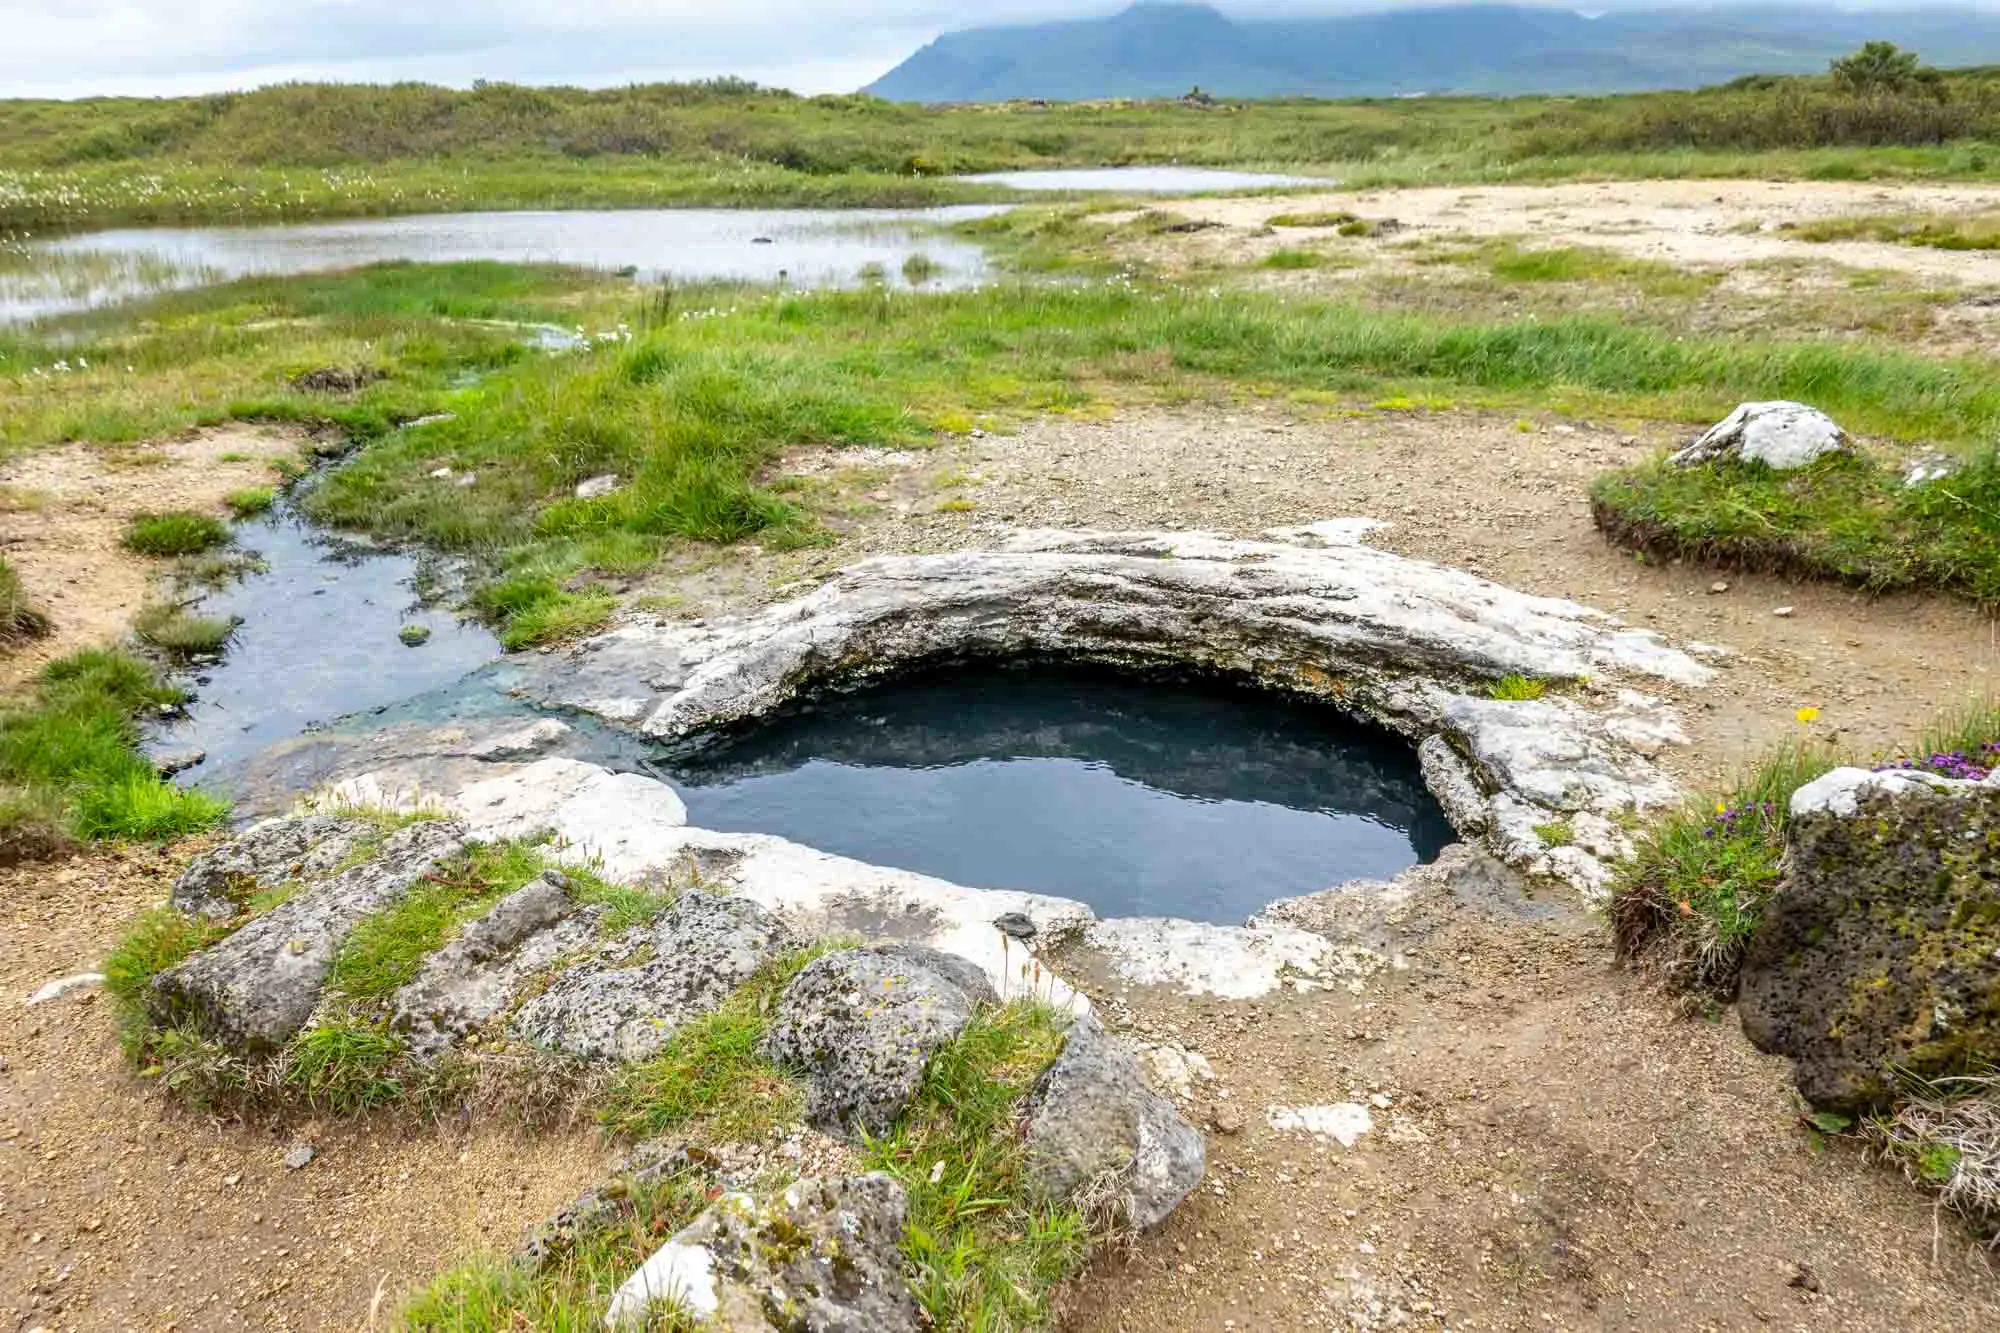 Small oval-shaped hot springs swimming hole in remote field with grass and rocks